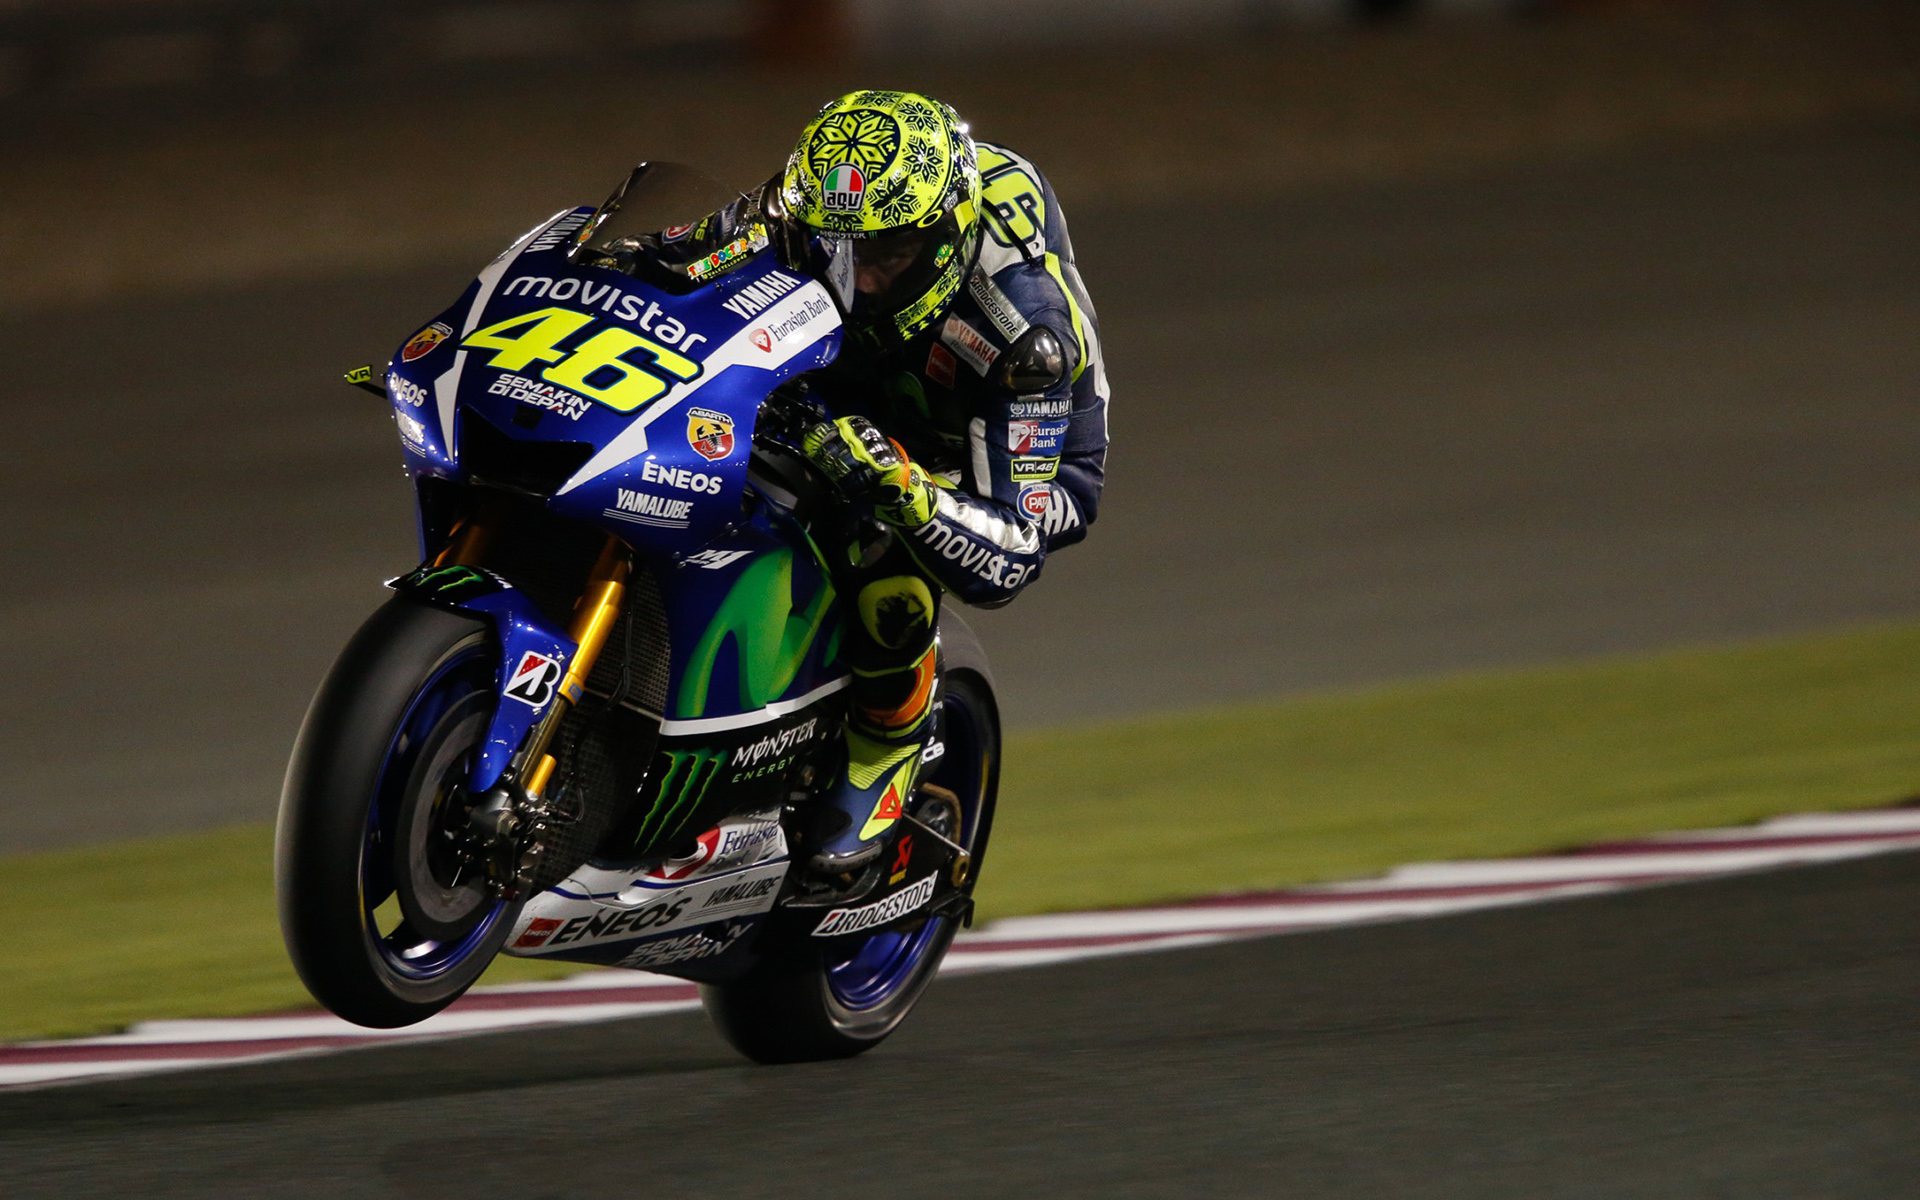 Rossi 46 Wallpapers Download | MobCup